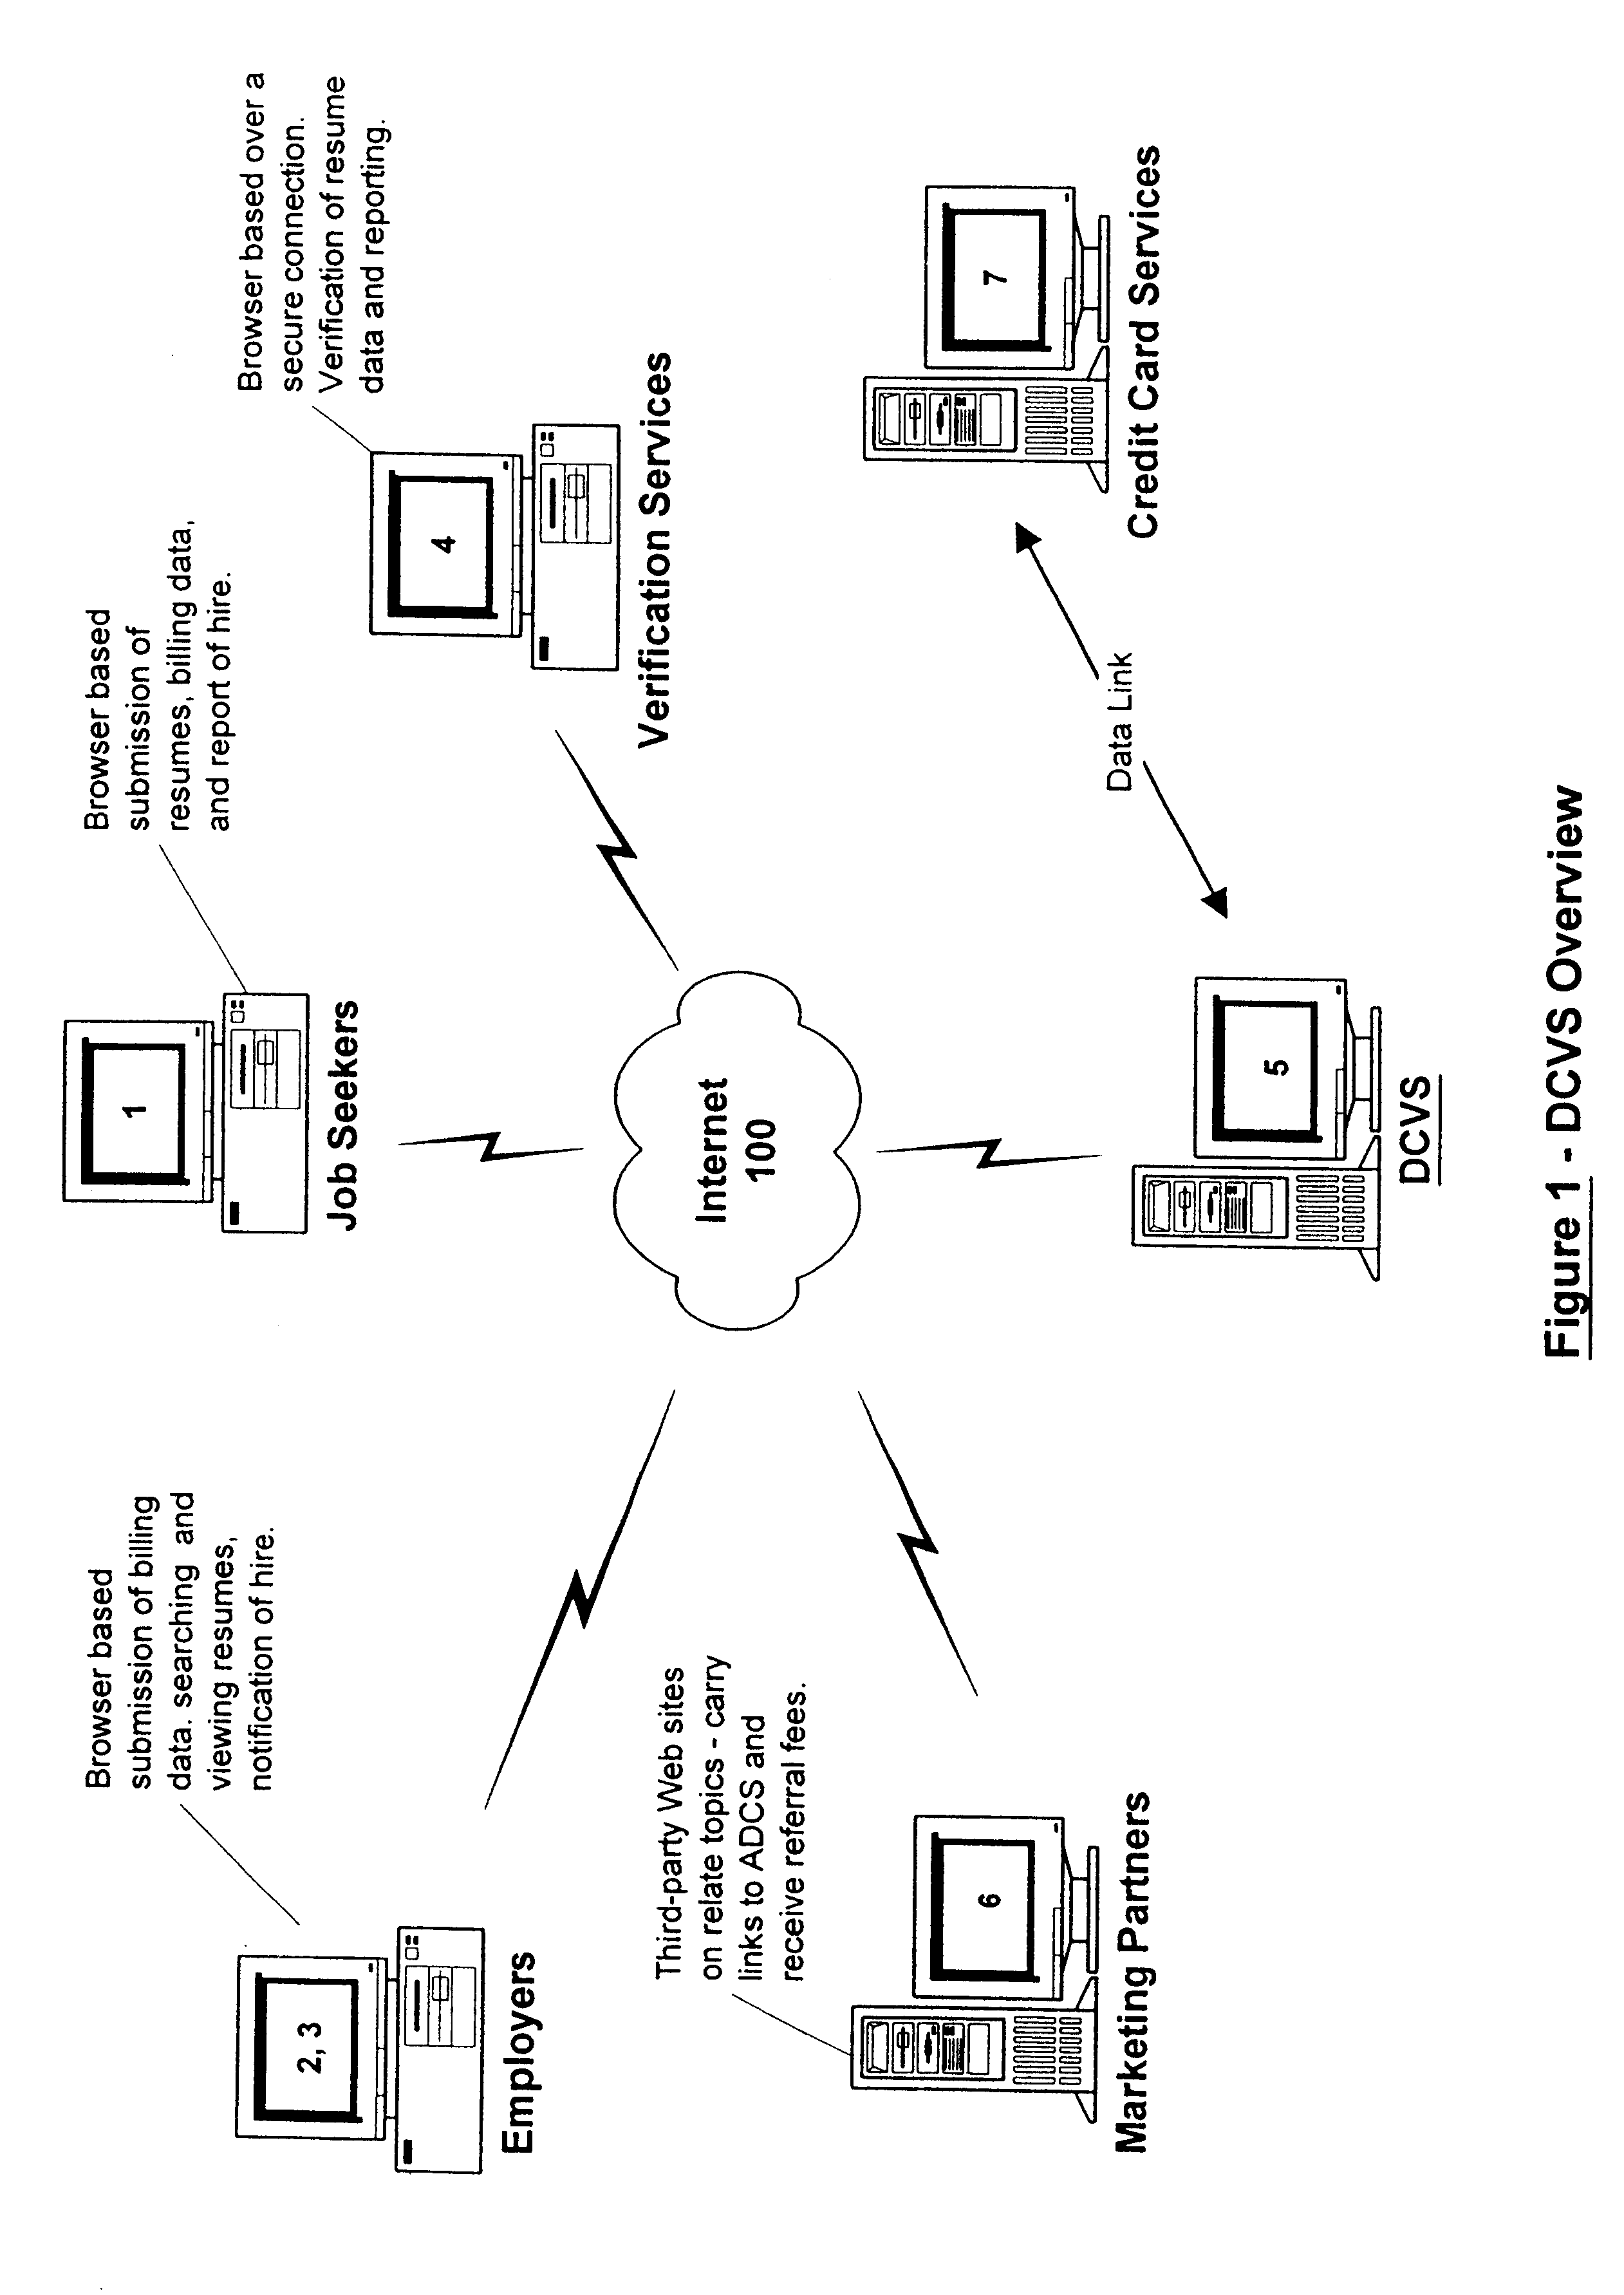 Data certification and verification system having a multiple-user-controlled data interface